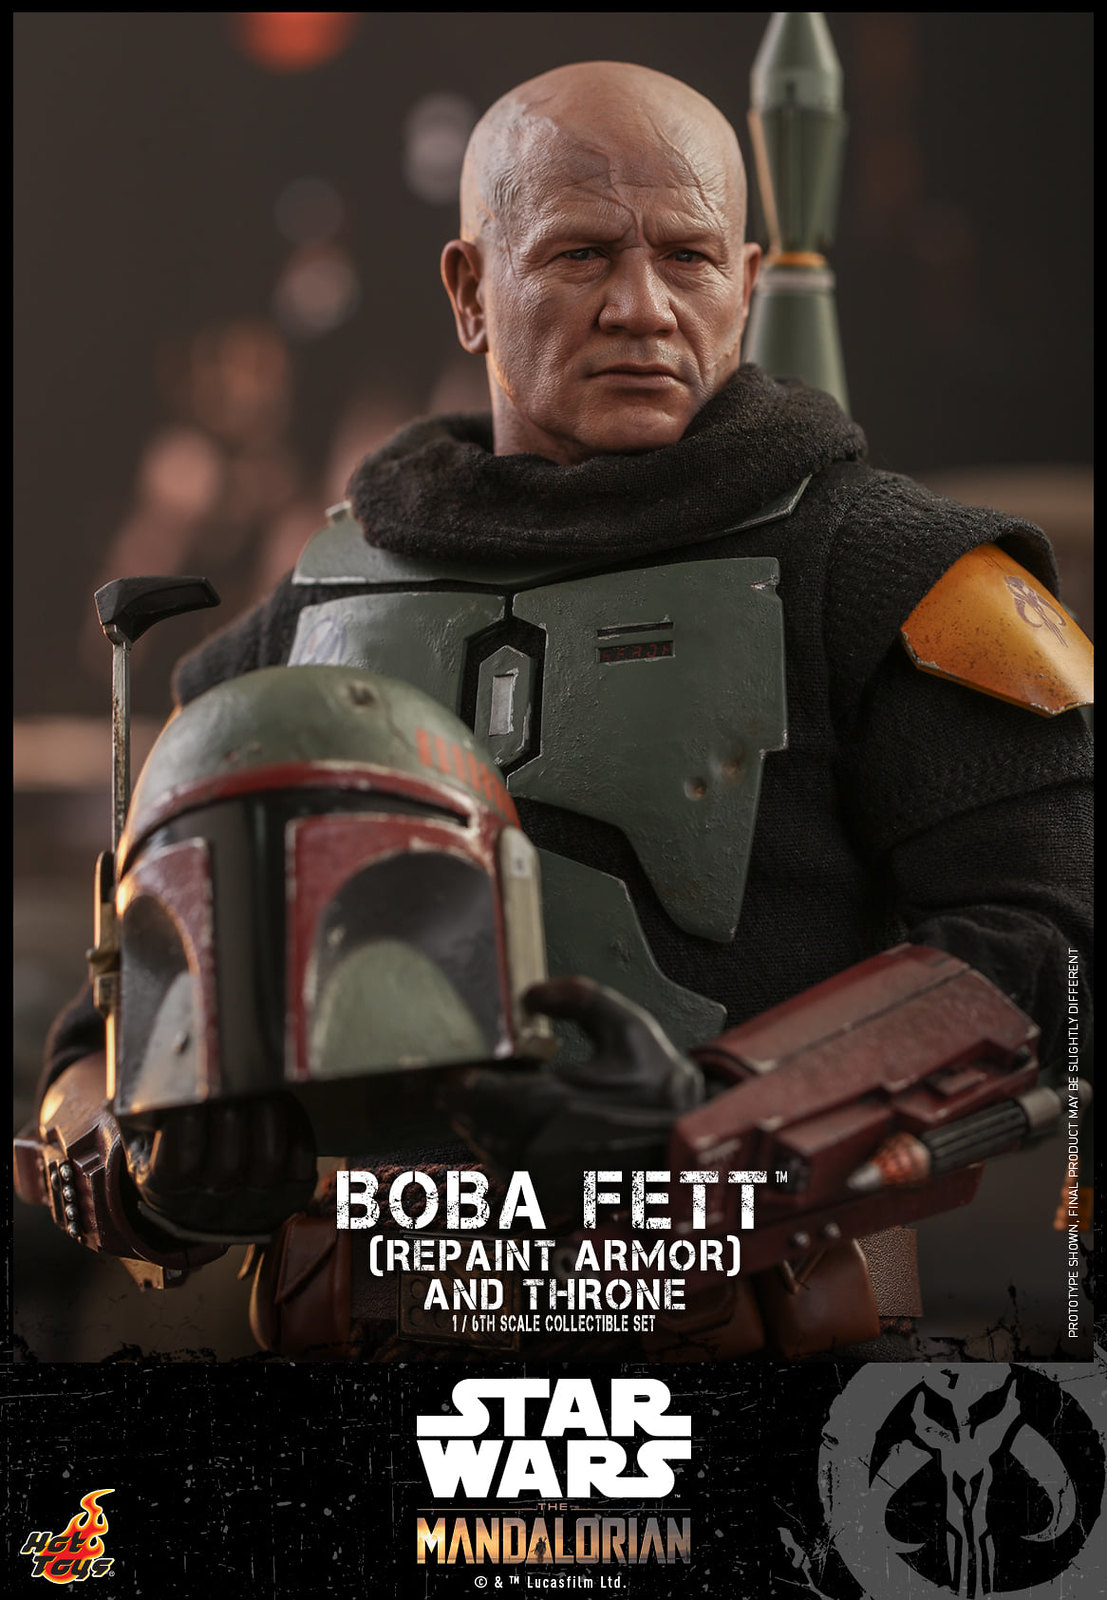 Star Wars: The Mandalorian™ - 1/6th scale Boba Fett™ (Repaint Armor) Collectible figure/ figure and Throne Collectible Set 51311496948_5d37d666f6_h